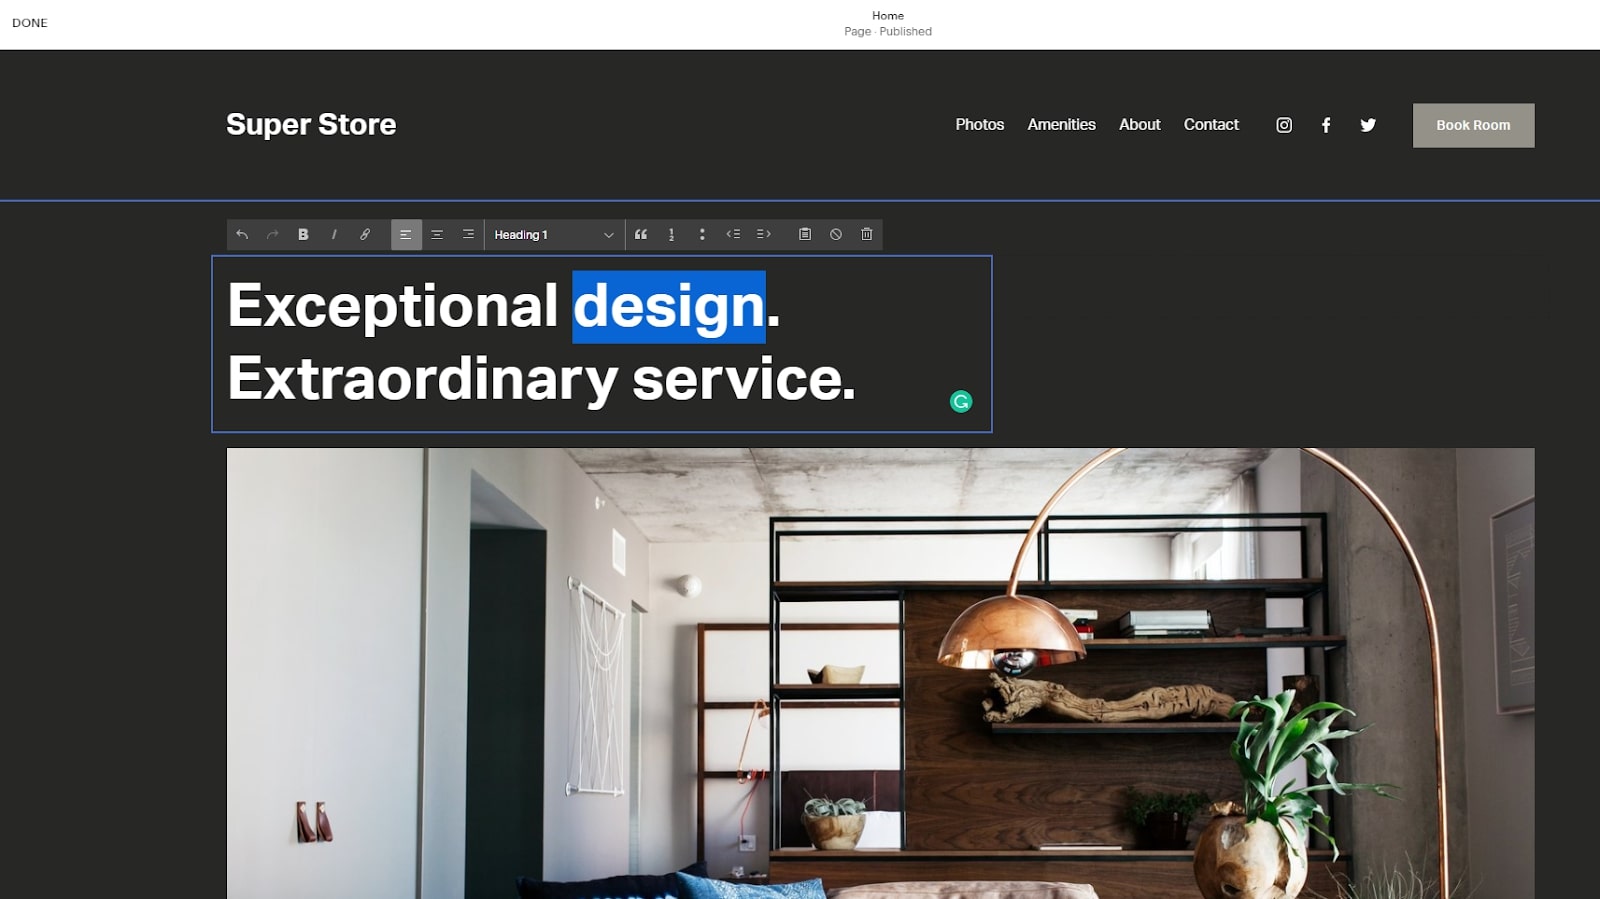 Squarespace's website editor in use